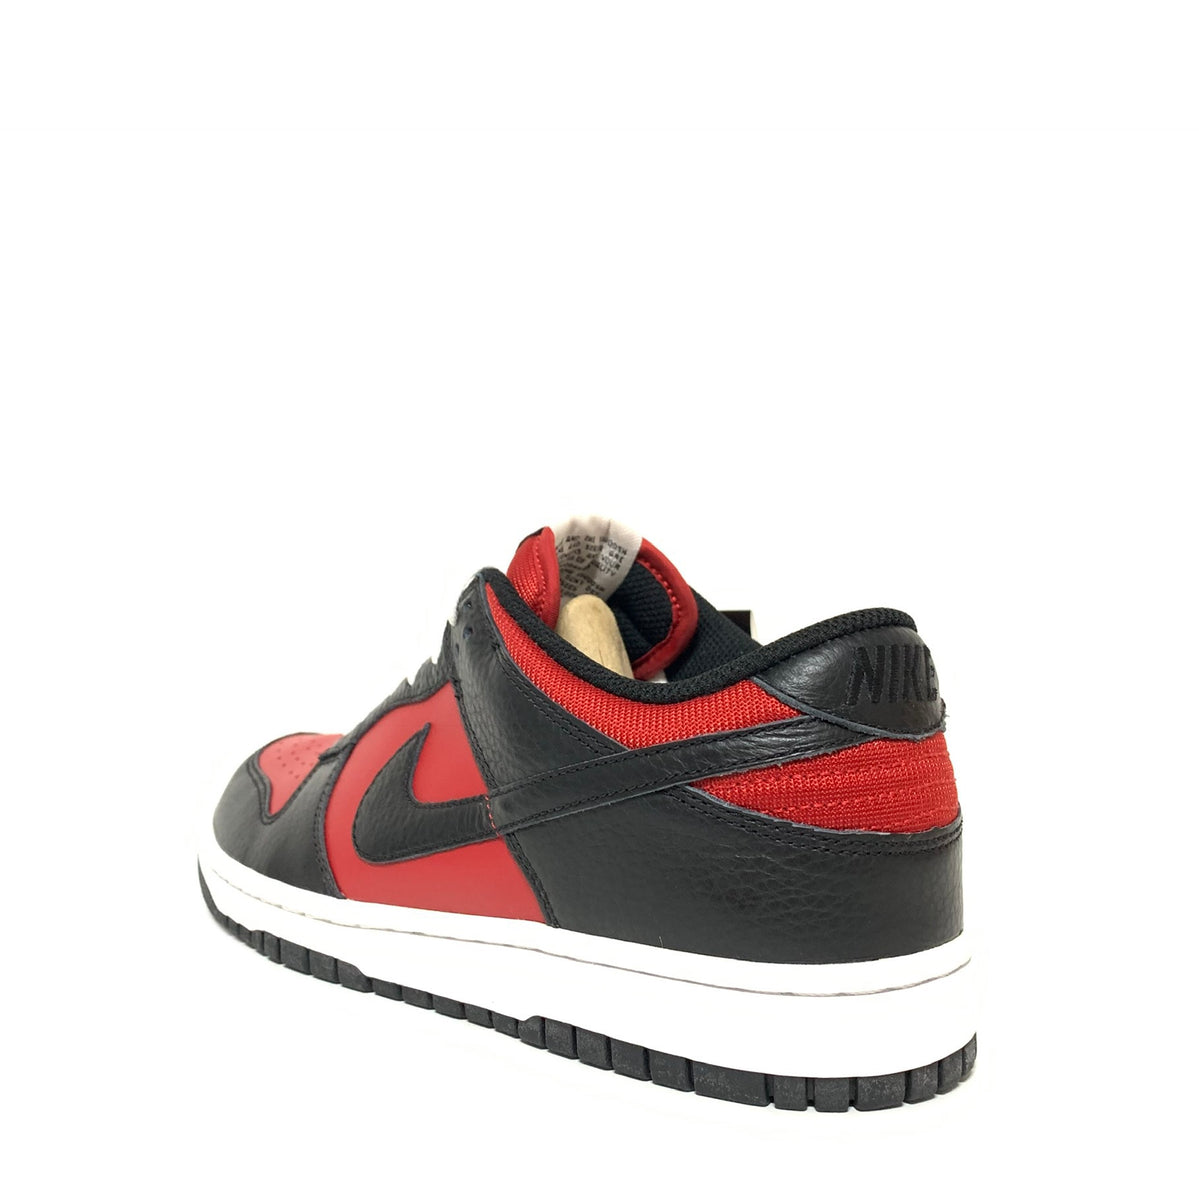 red and black dunks low